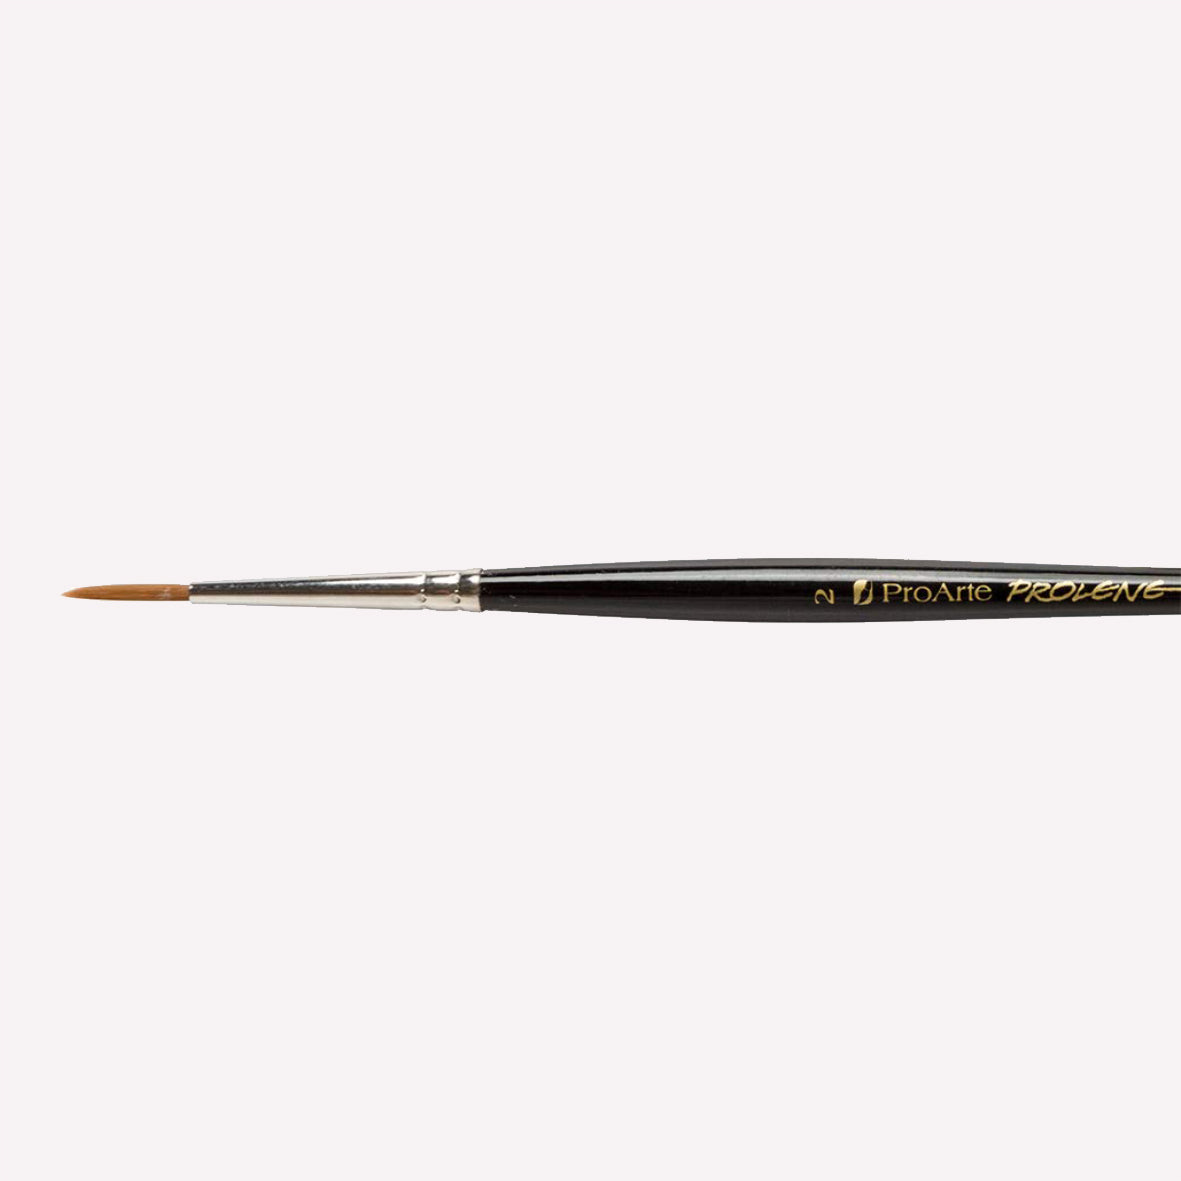 Pro Arte’s Prolene round paintbrush in size 101-2. Brushes have synthetic bristles, an ergonomic black handle and a silver ferrule. 